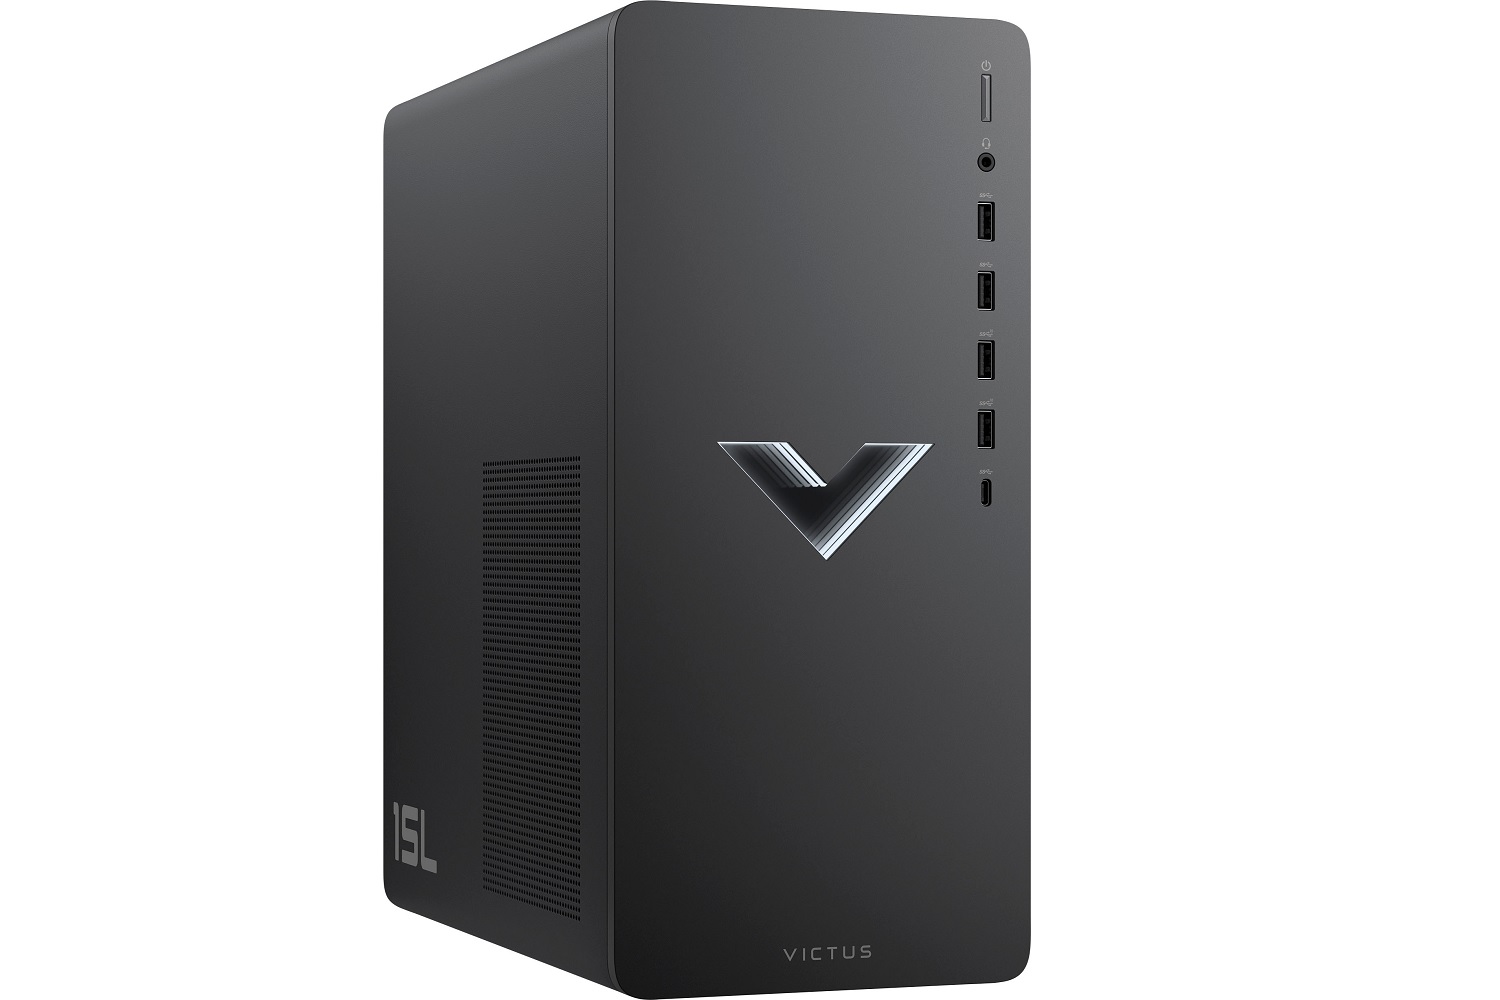  Best gaming PC deals: Get a new desktop rig from 530 today